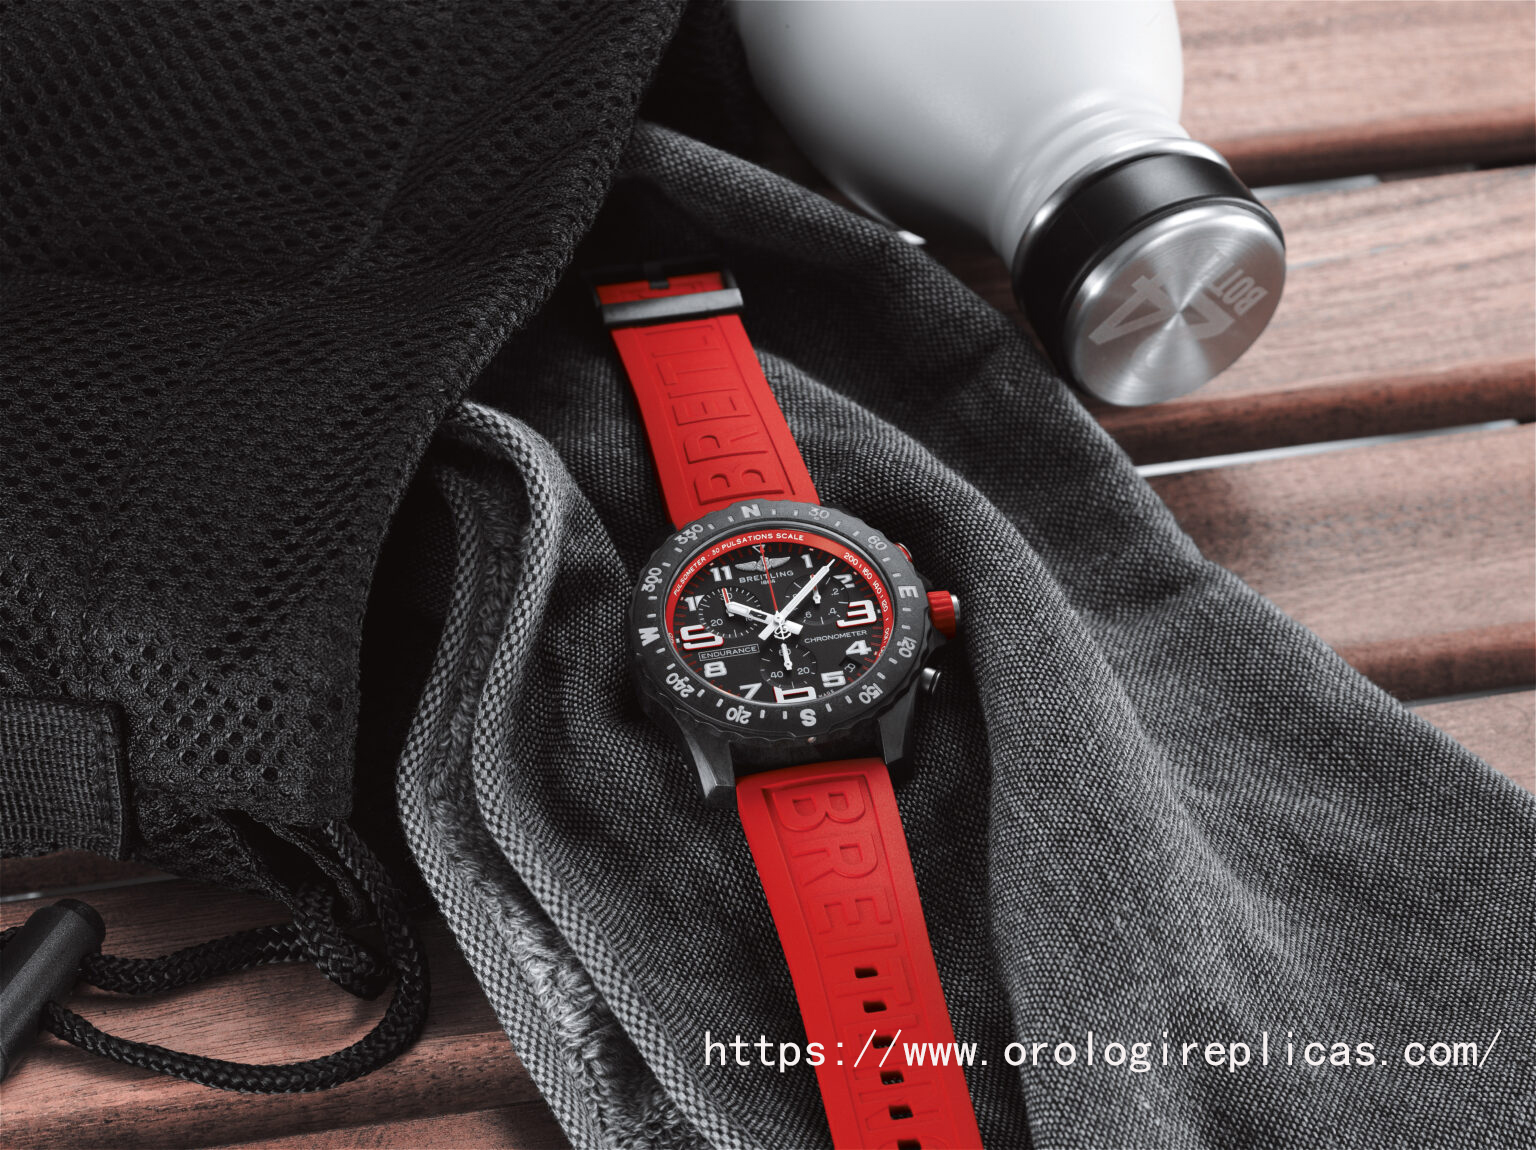 replica03_endurance-pro-with-a-red-inner-bezel-and-rubber-strap-1-1536x1150